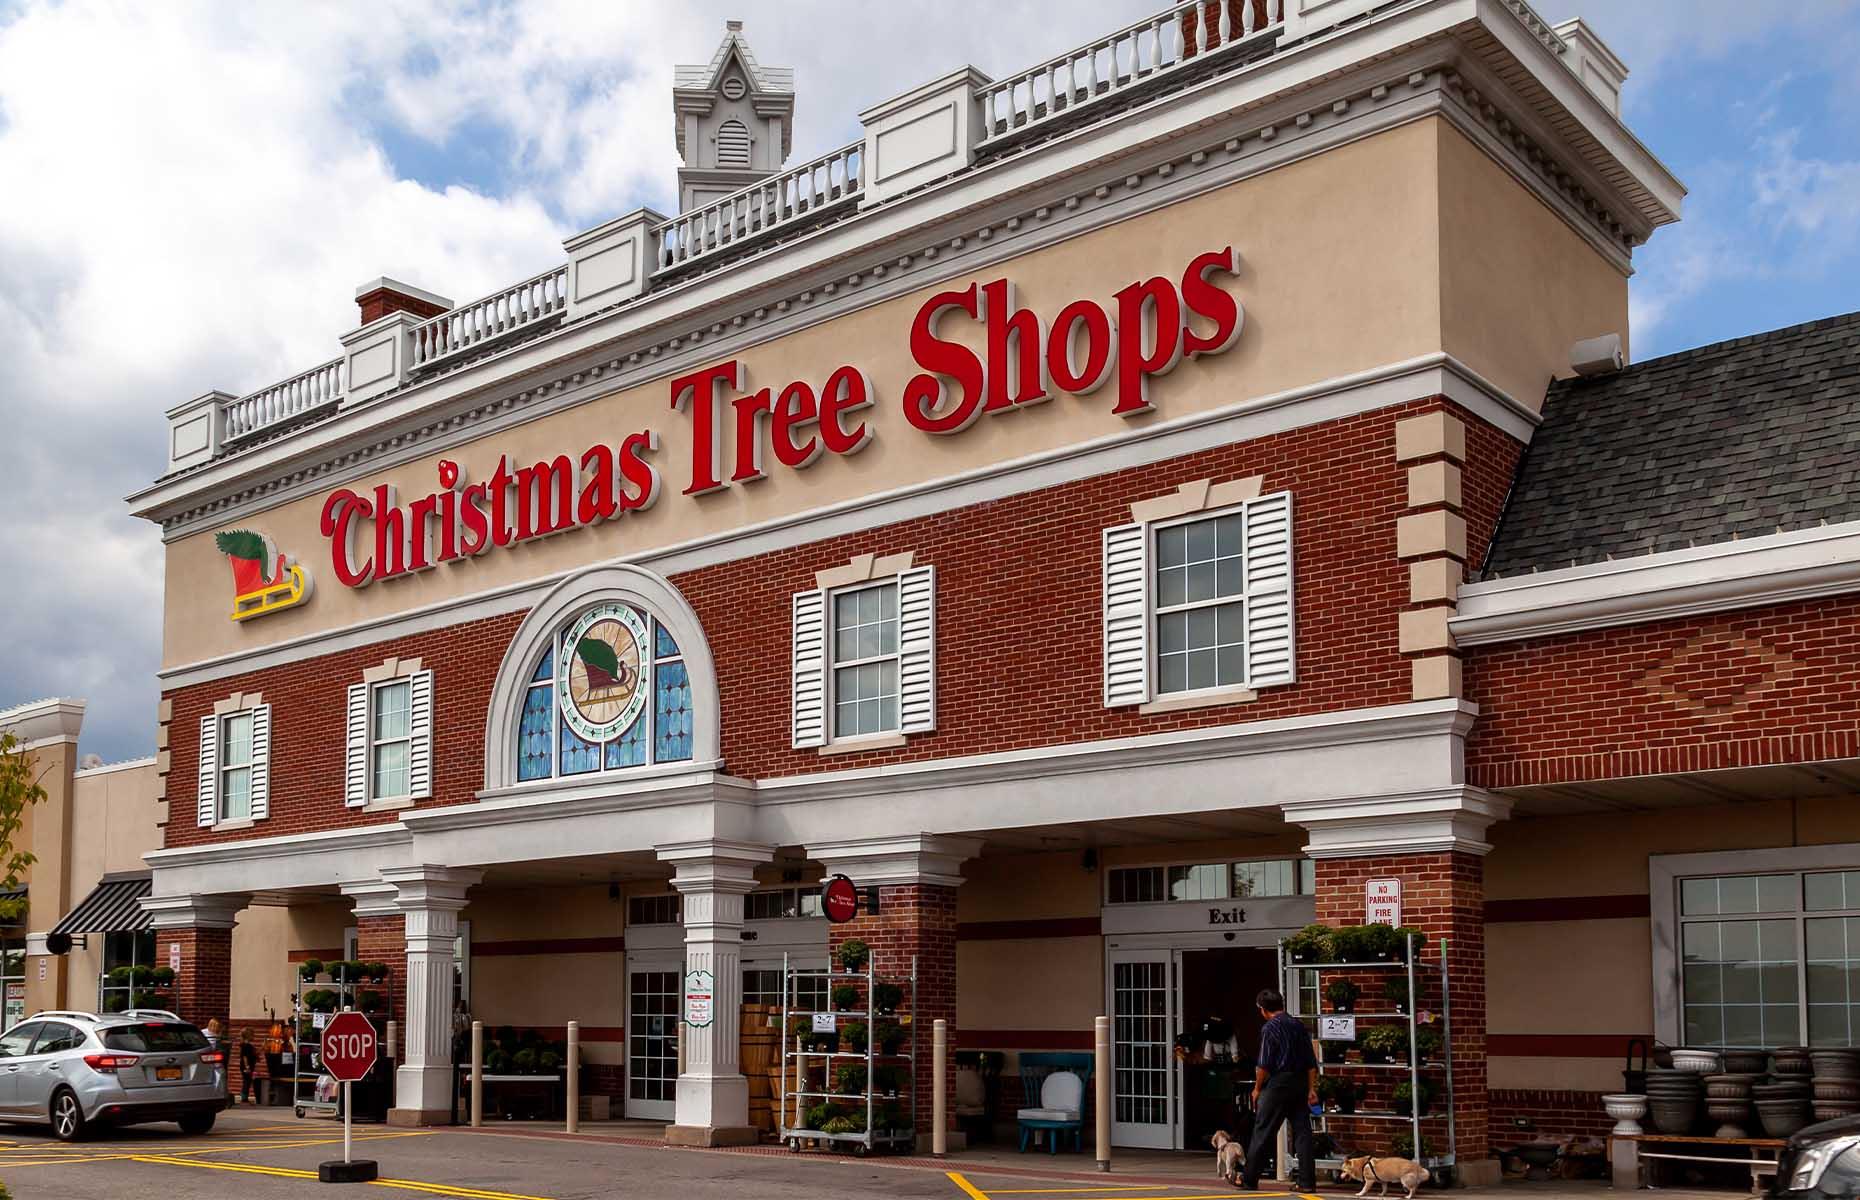 Christmas Tree Shops: 73 stores closed this year